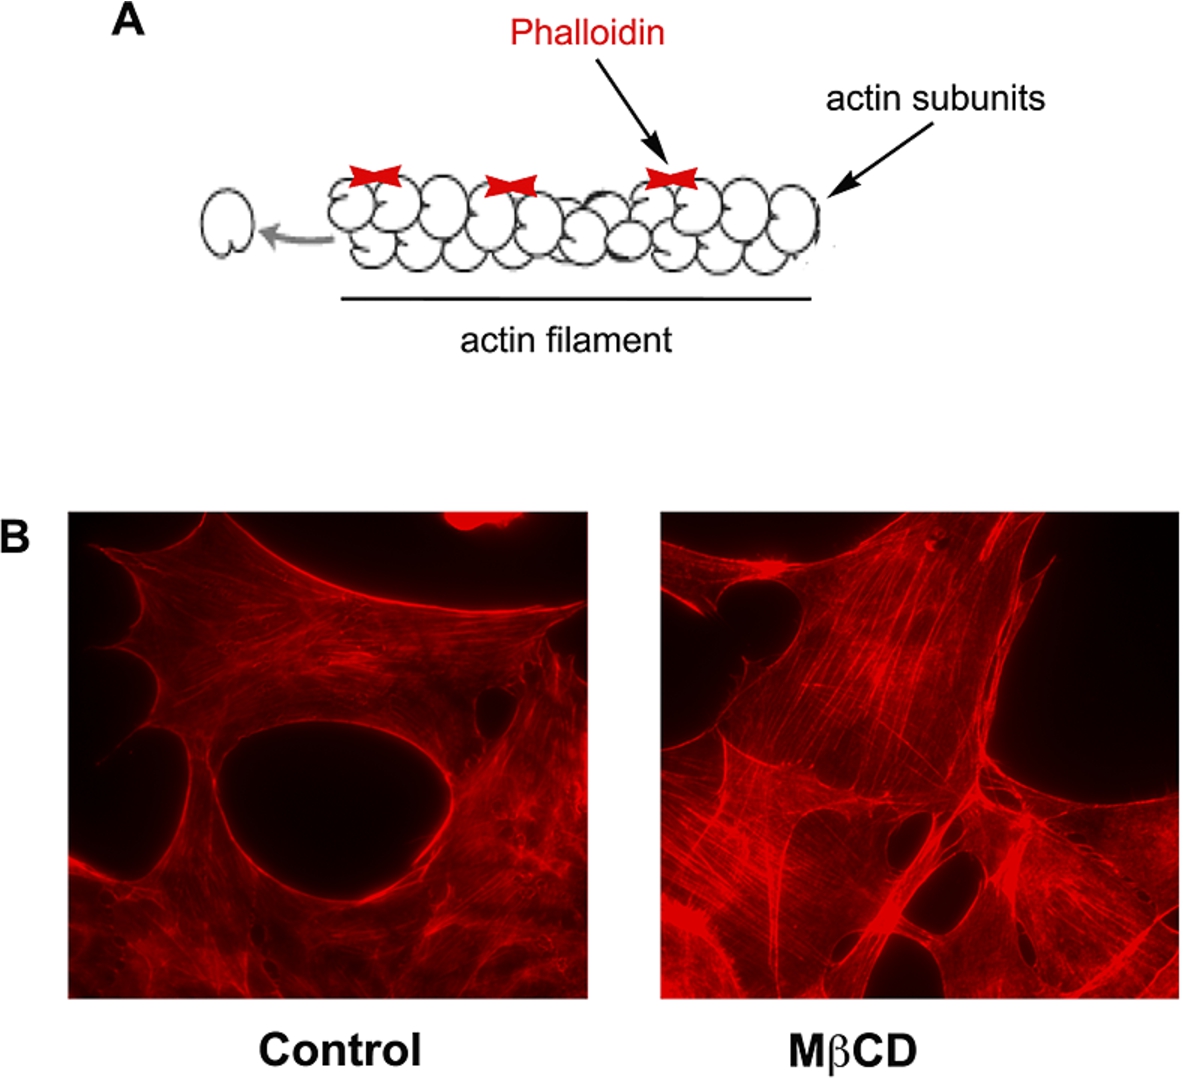 (A) Representative image of actin filaments and the sites of binding of phalloidin. (B) Fluorescence images of mouse embryonic fibroblasts treated or not (control) with MβCD 10 mM, fixed with 4% paraphormadehyde and labeled with phalloiding conjugated with Alexa fluor 546 (Invitrogen®). Arrows indicate the actin stress fibers in MβCD treated cells.